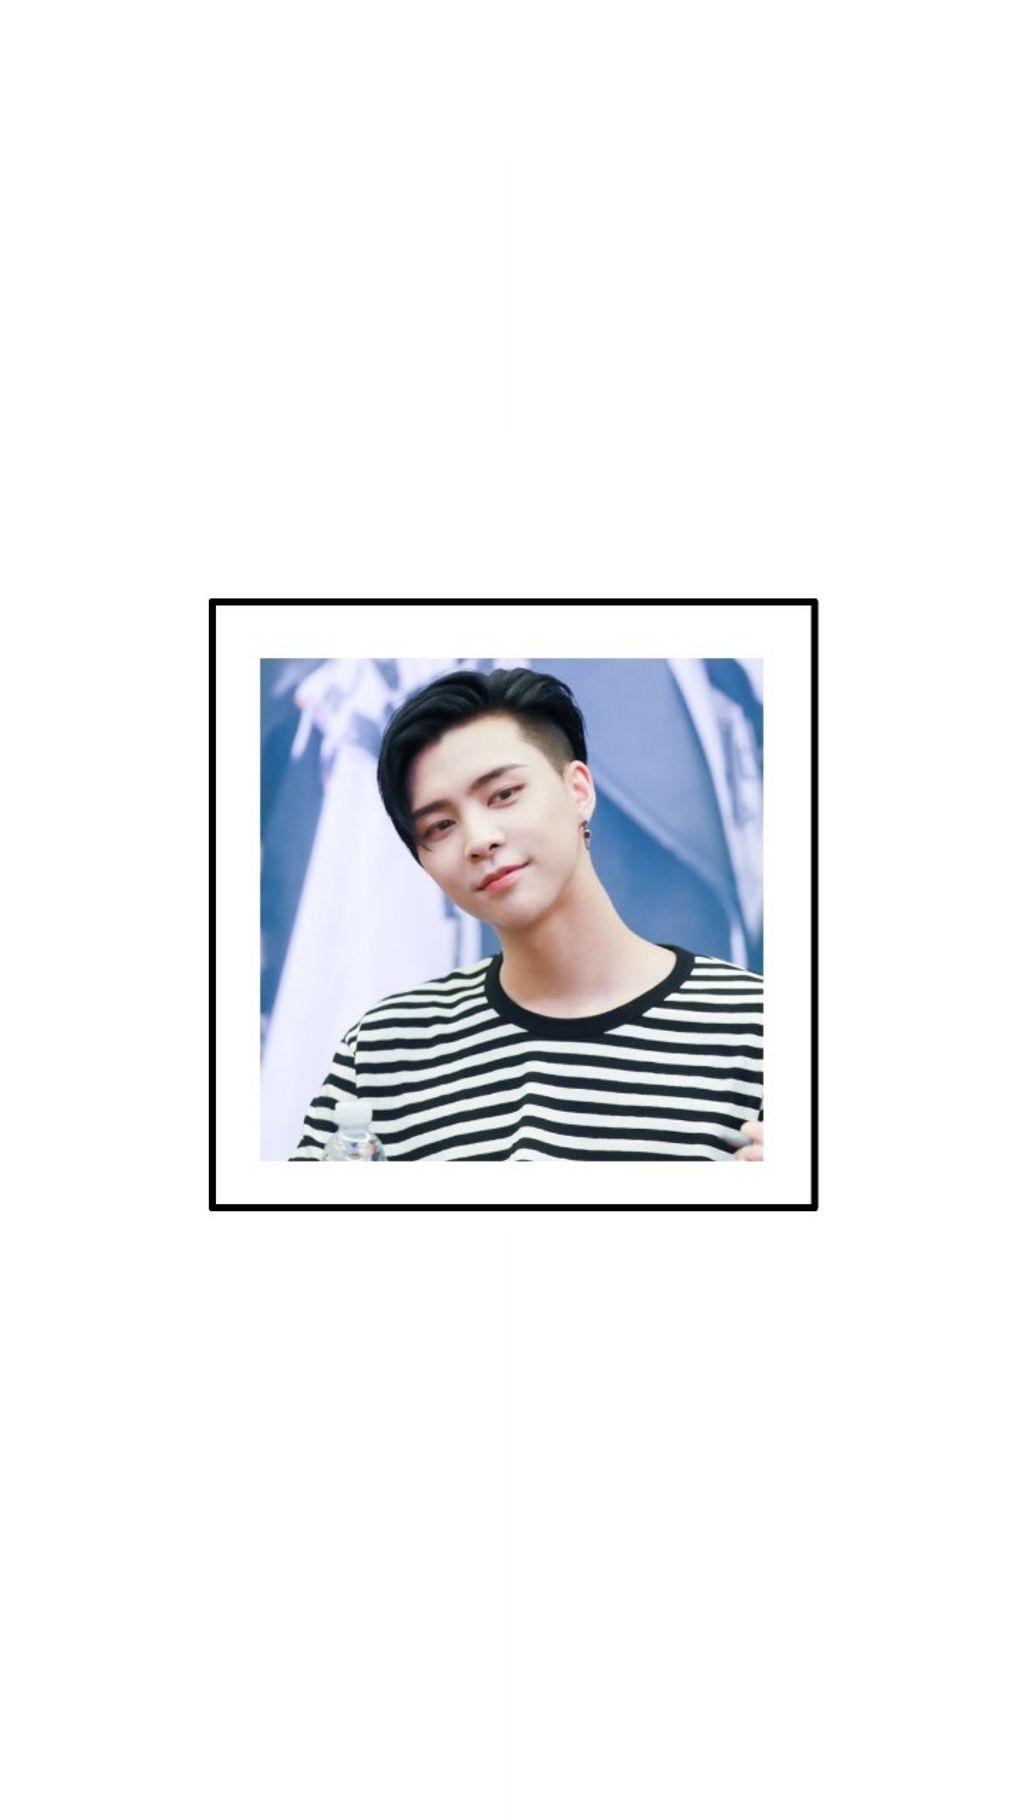 Johnny: Wallpaper ♡ nct nctu nct127 johnny nctdream kp